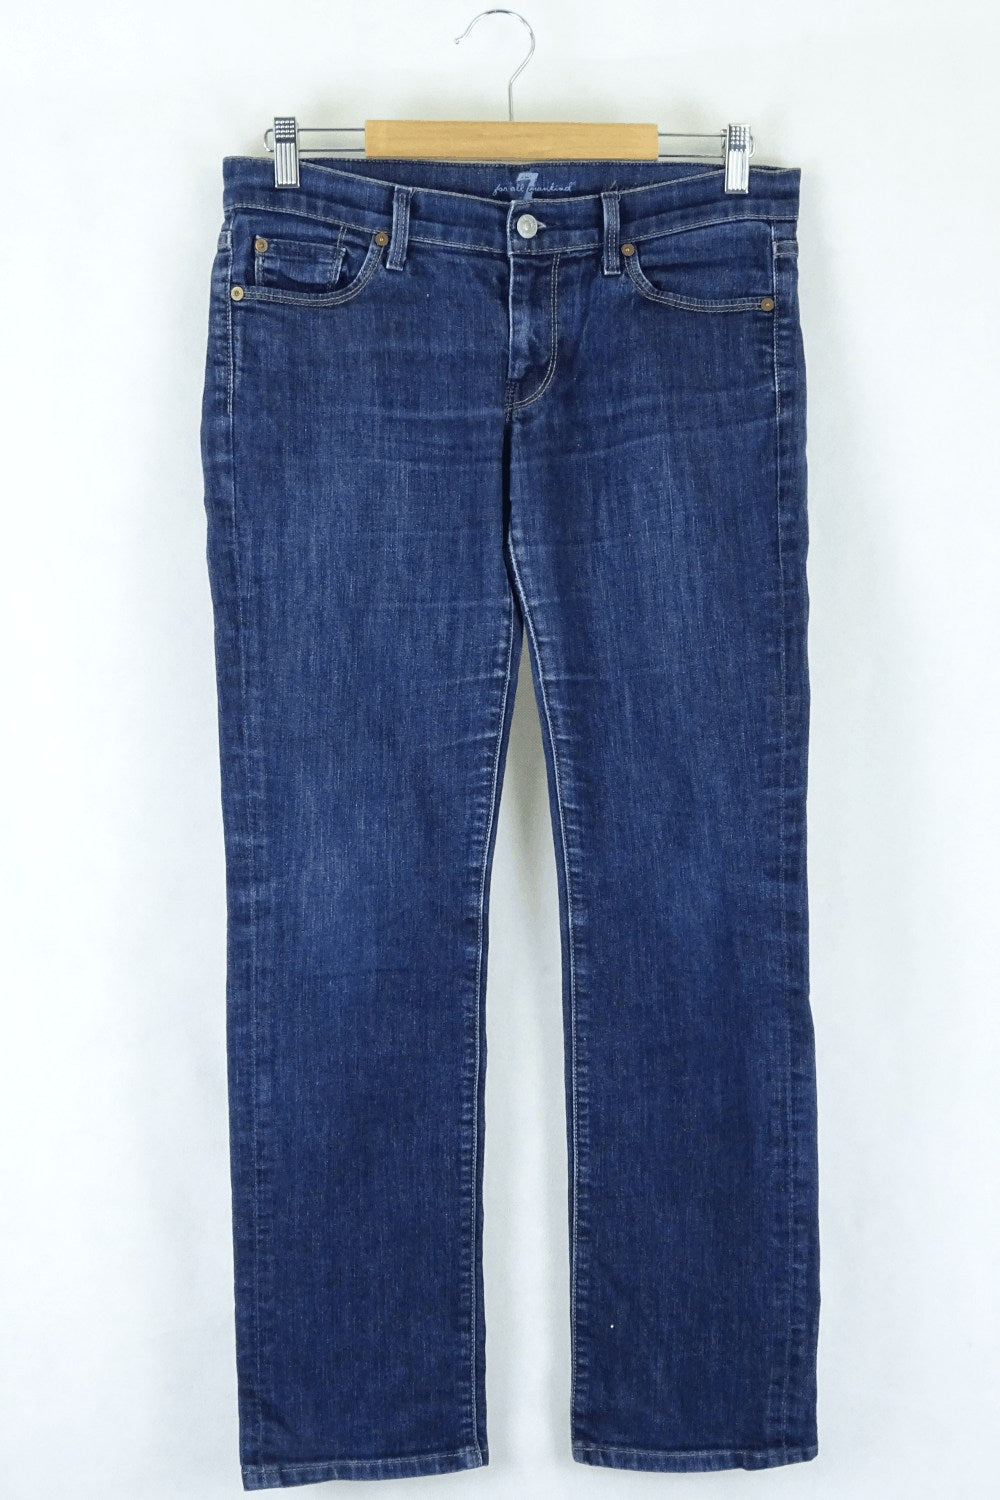 7 For all Mankind Blue Jeans 28 ( AU10)